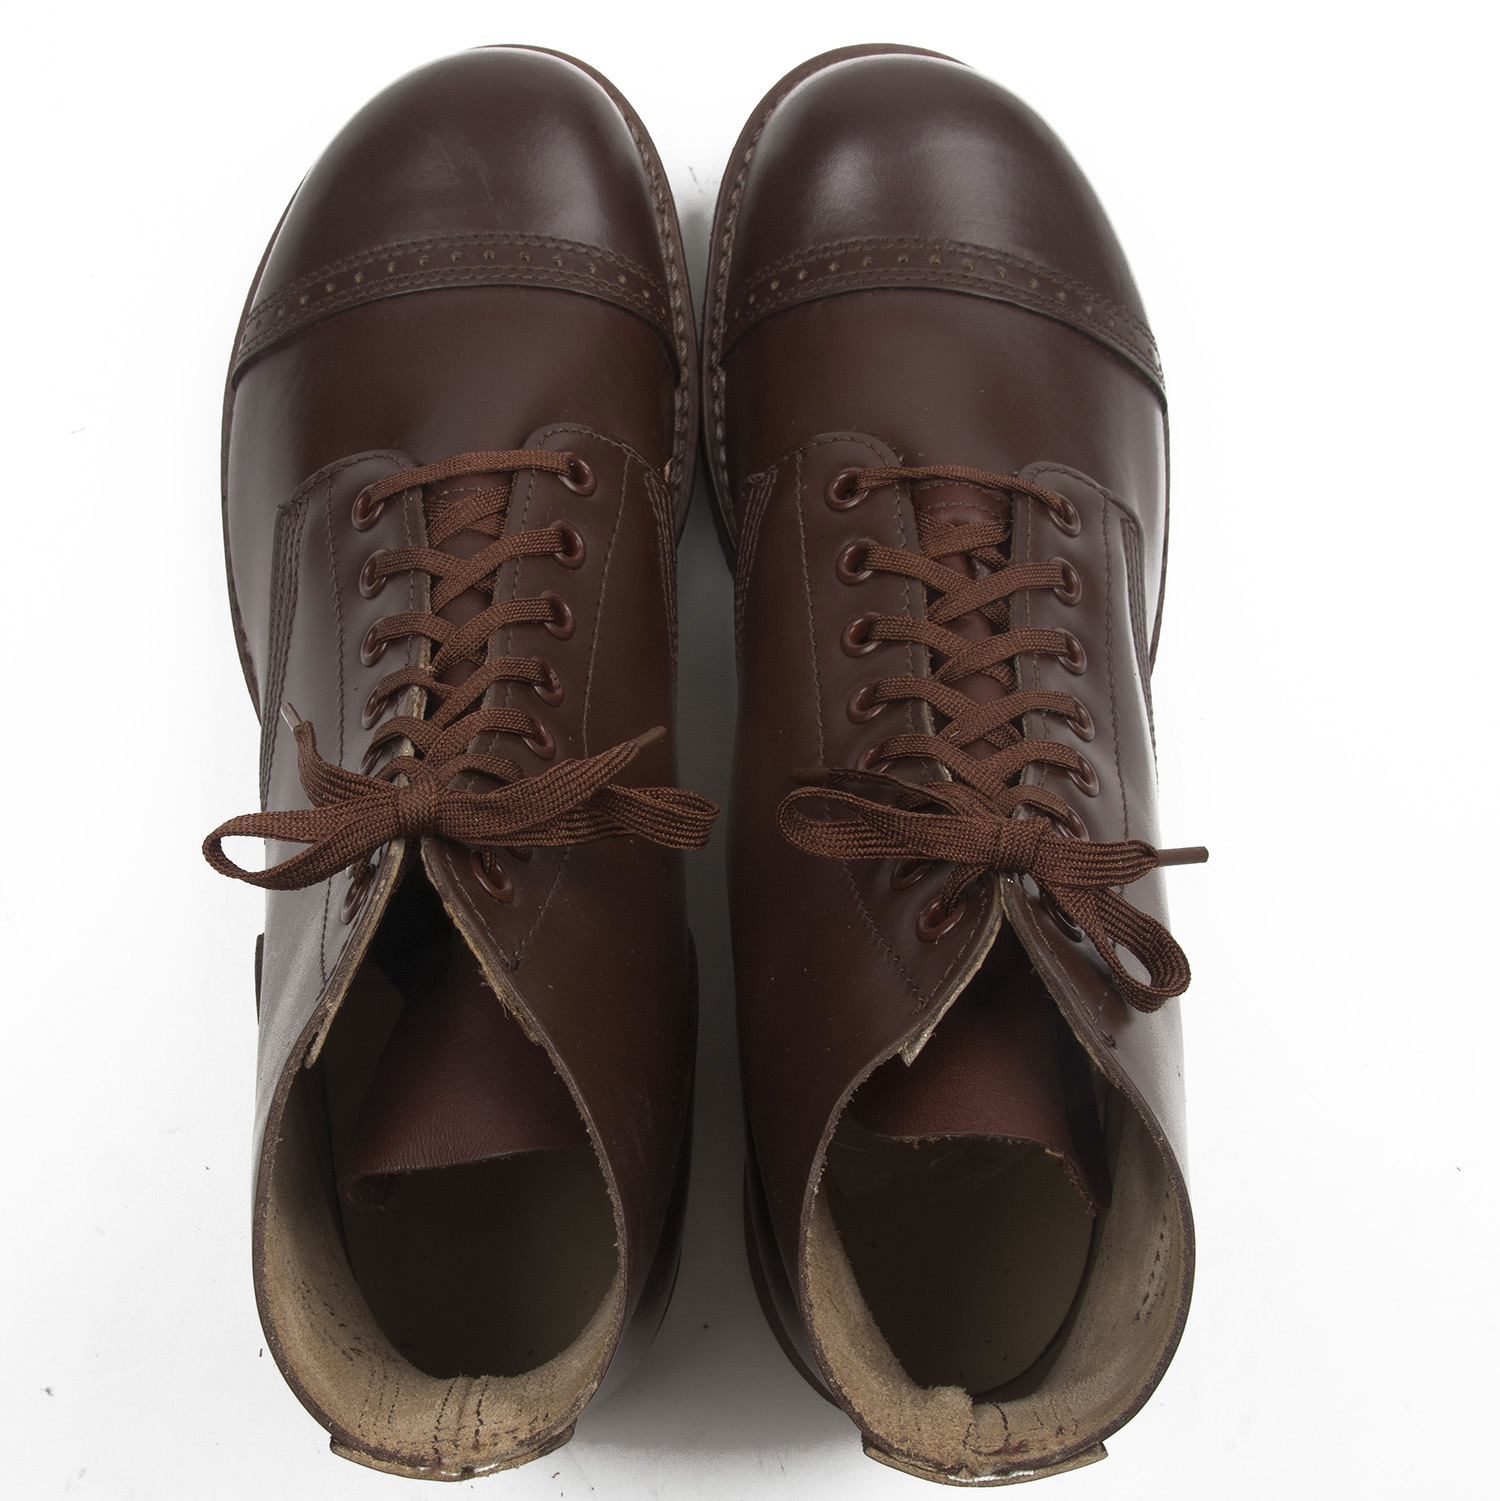 British Army Item Various Sizes Available Leather Service Shoes With Toe Cap 